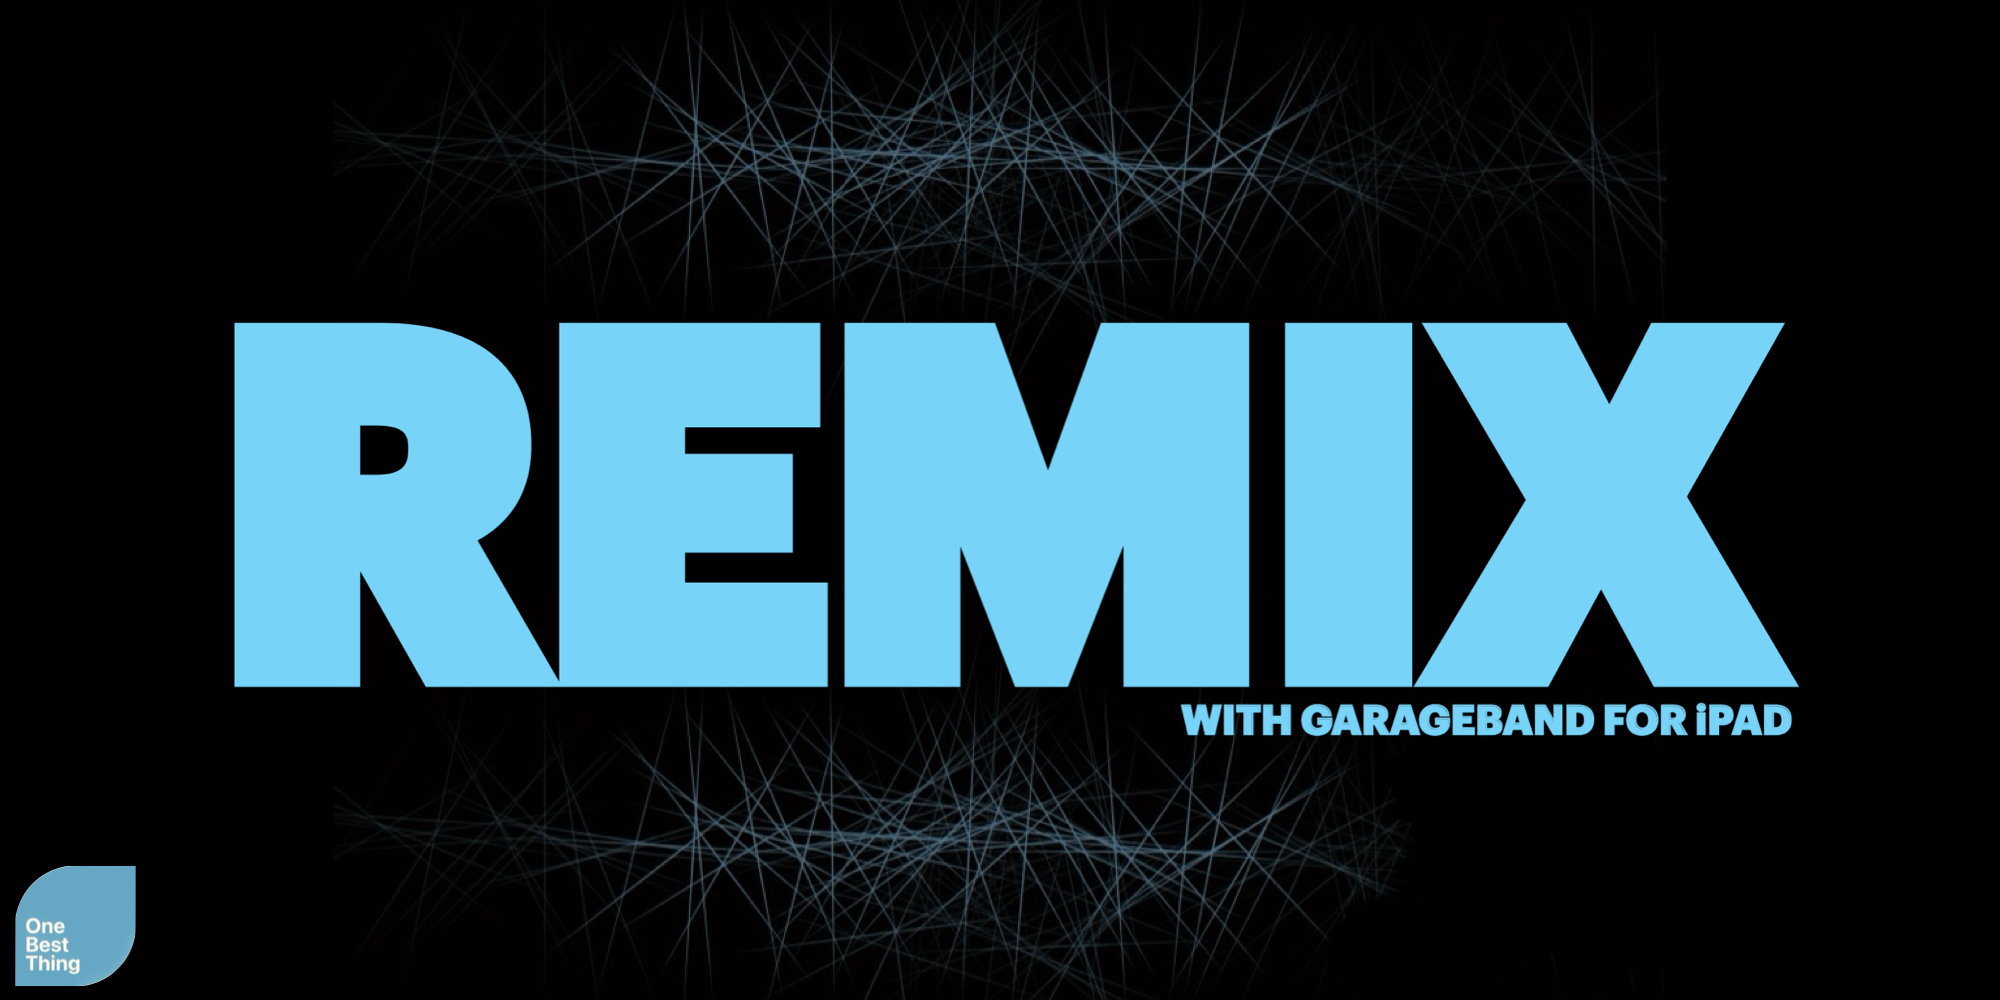 Text reads: Remix with GarageBand for iPad. In Light blue, against and dark background.